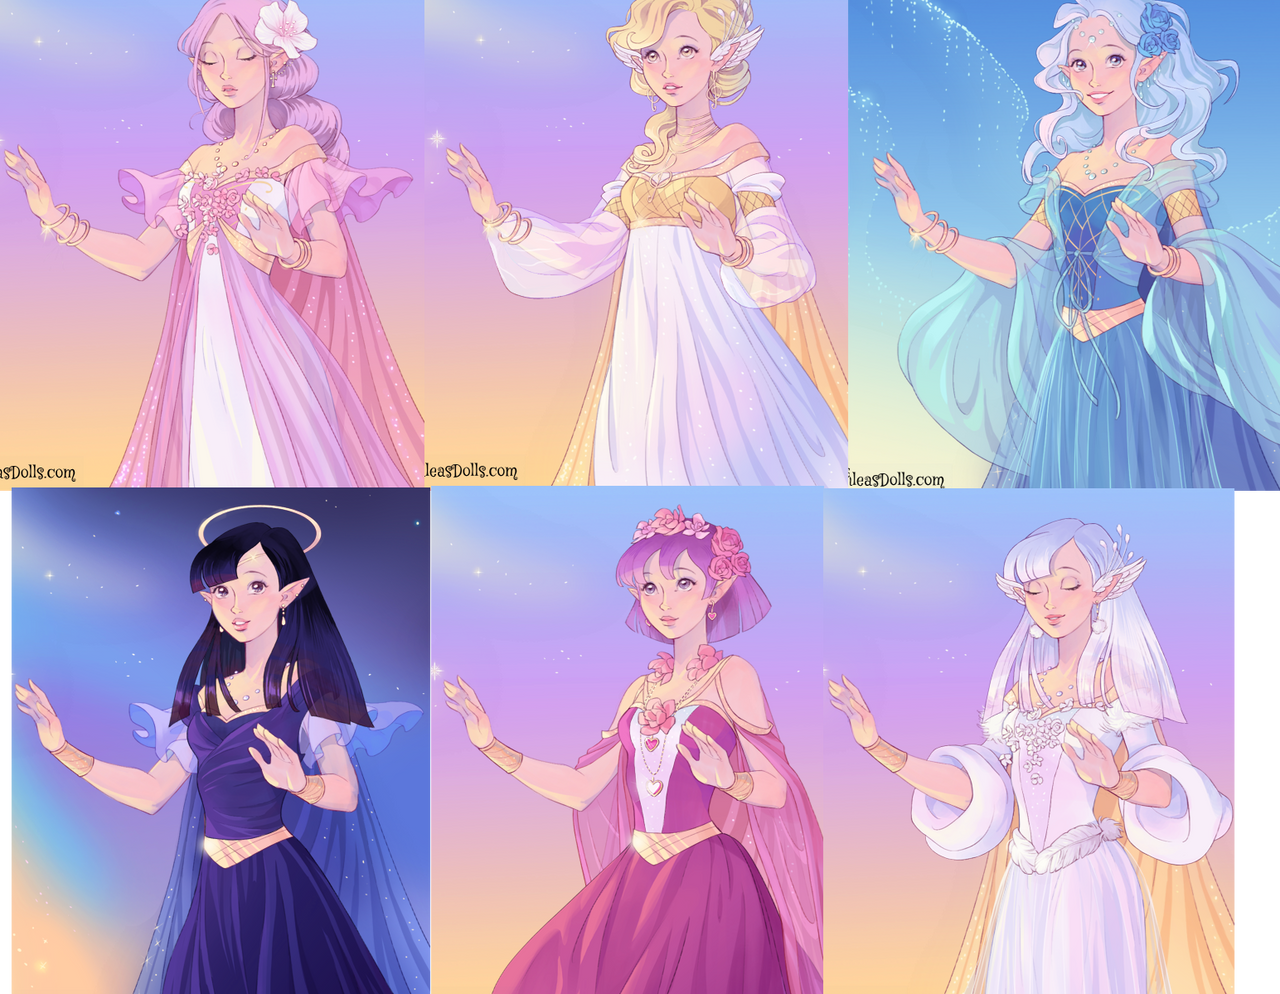 New dress up game: Magical Elf by AzaleasDolls : r/ImaginaryCharacters